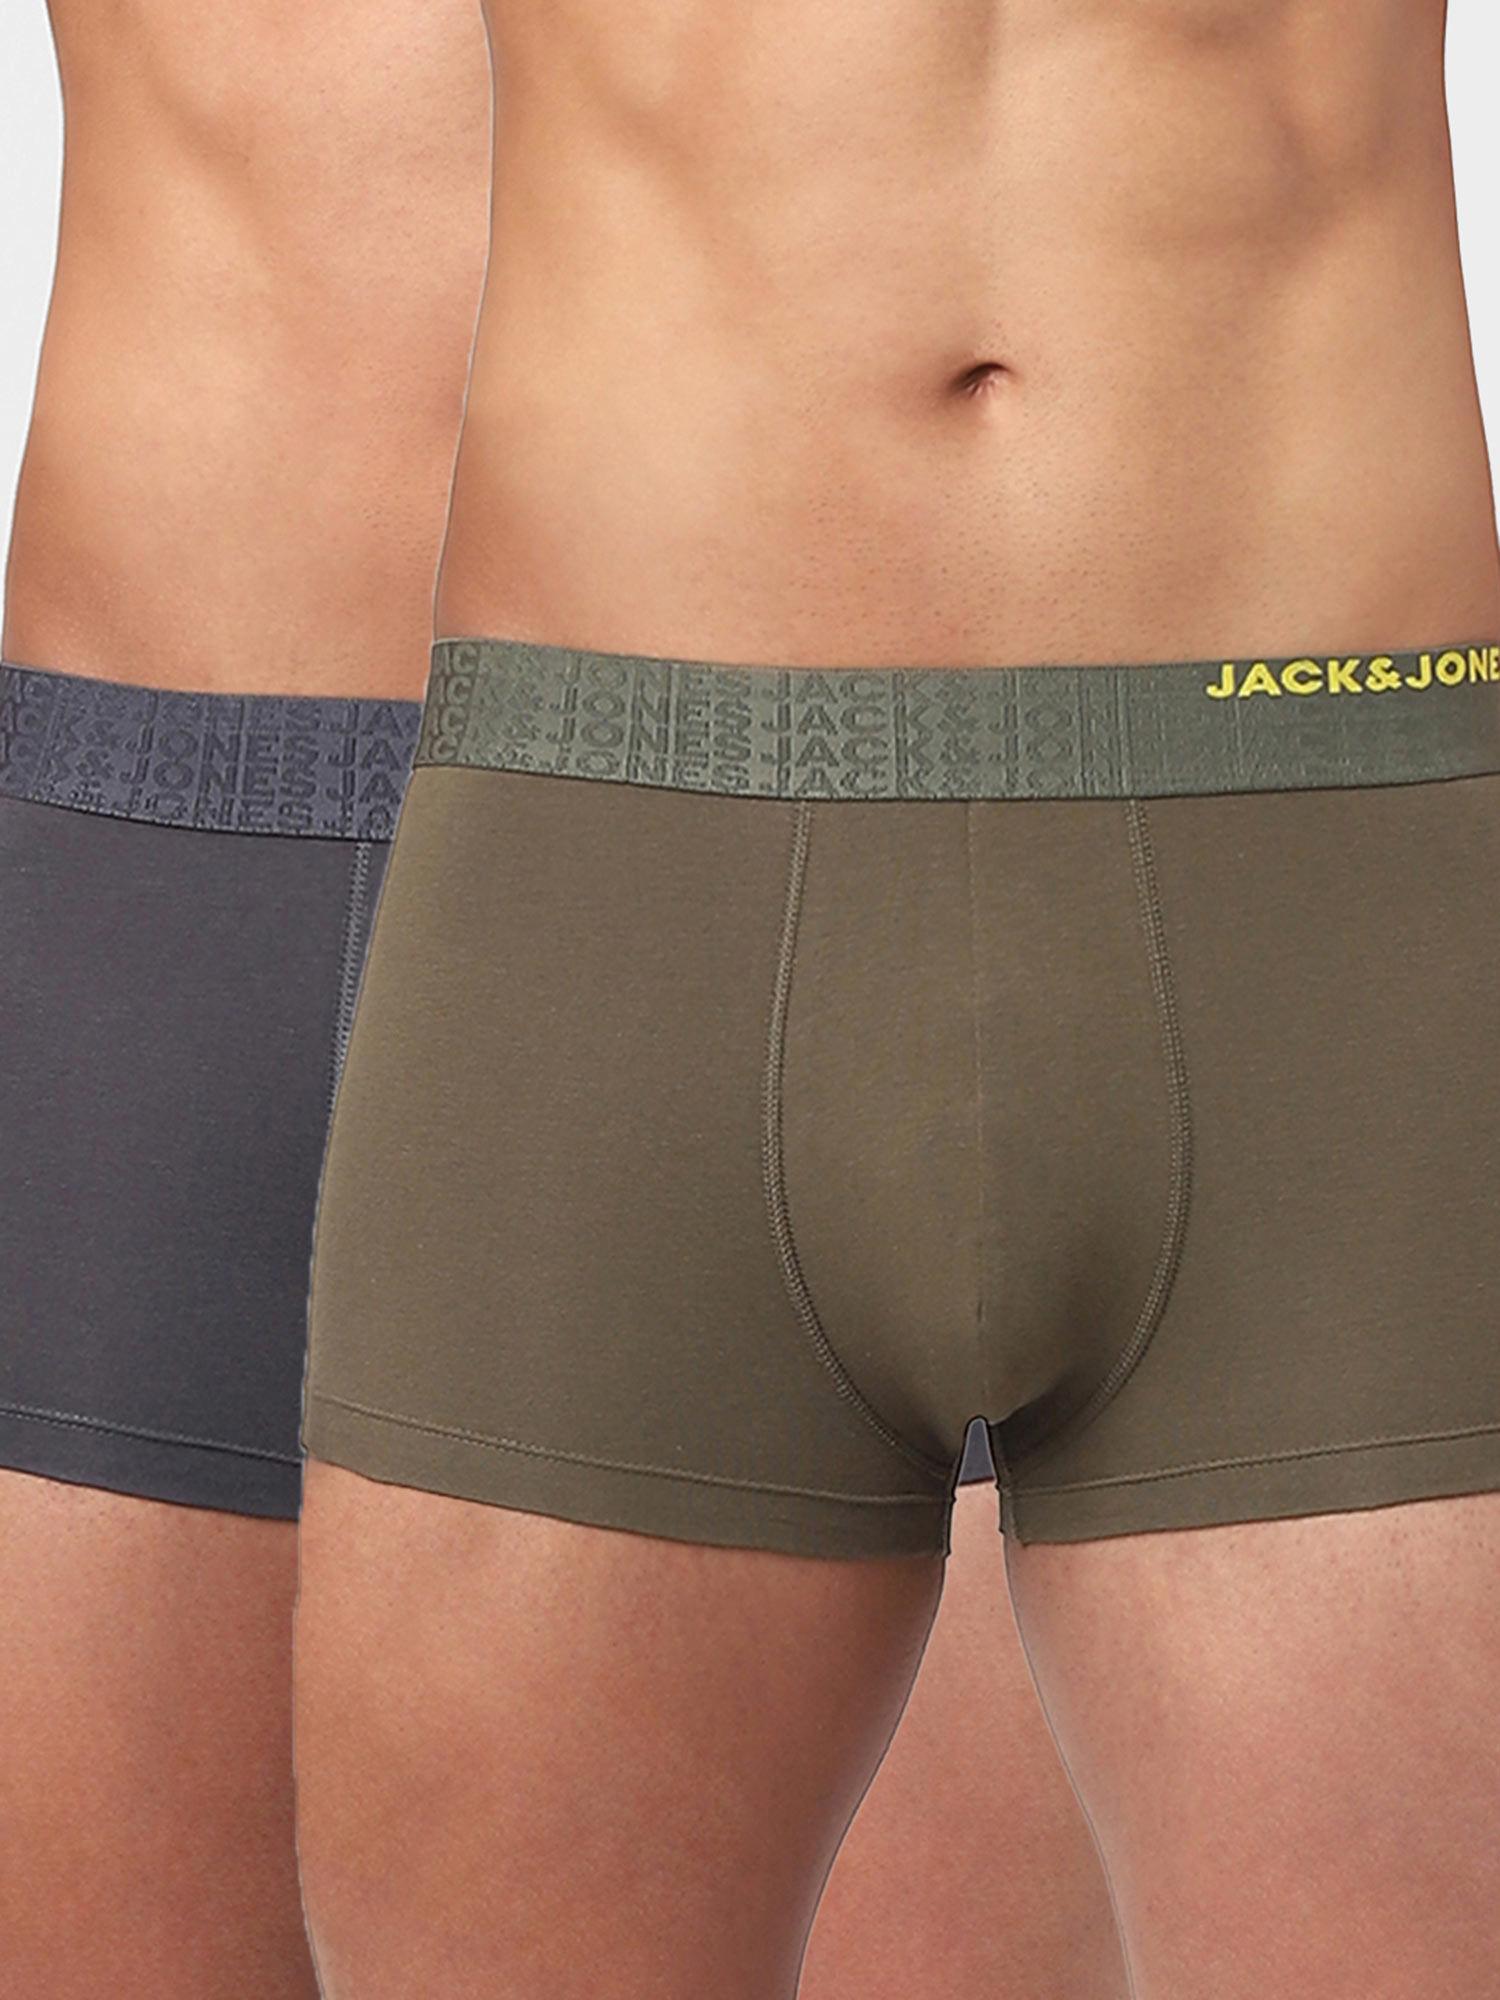 green-&amp;-grey-solid-trunks---pack-of-2